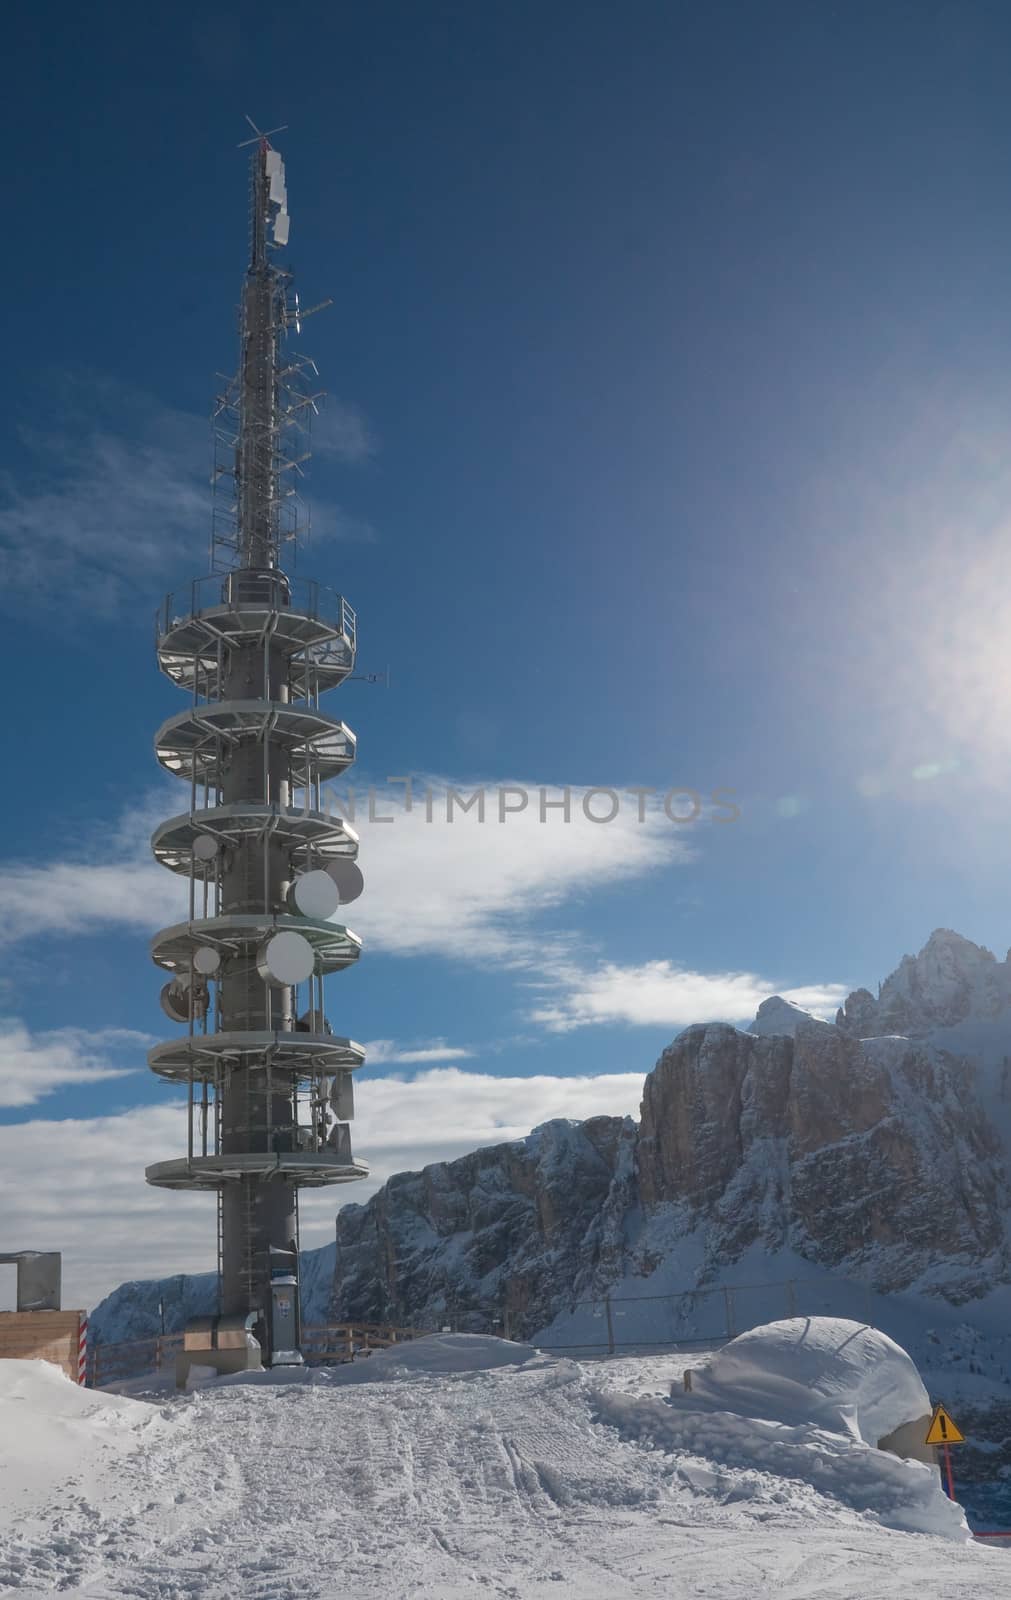 Communication tower with antennas. Selva di Val Gardena, Italy